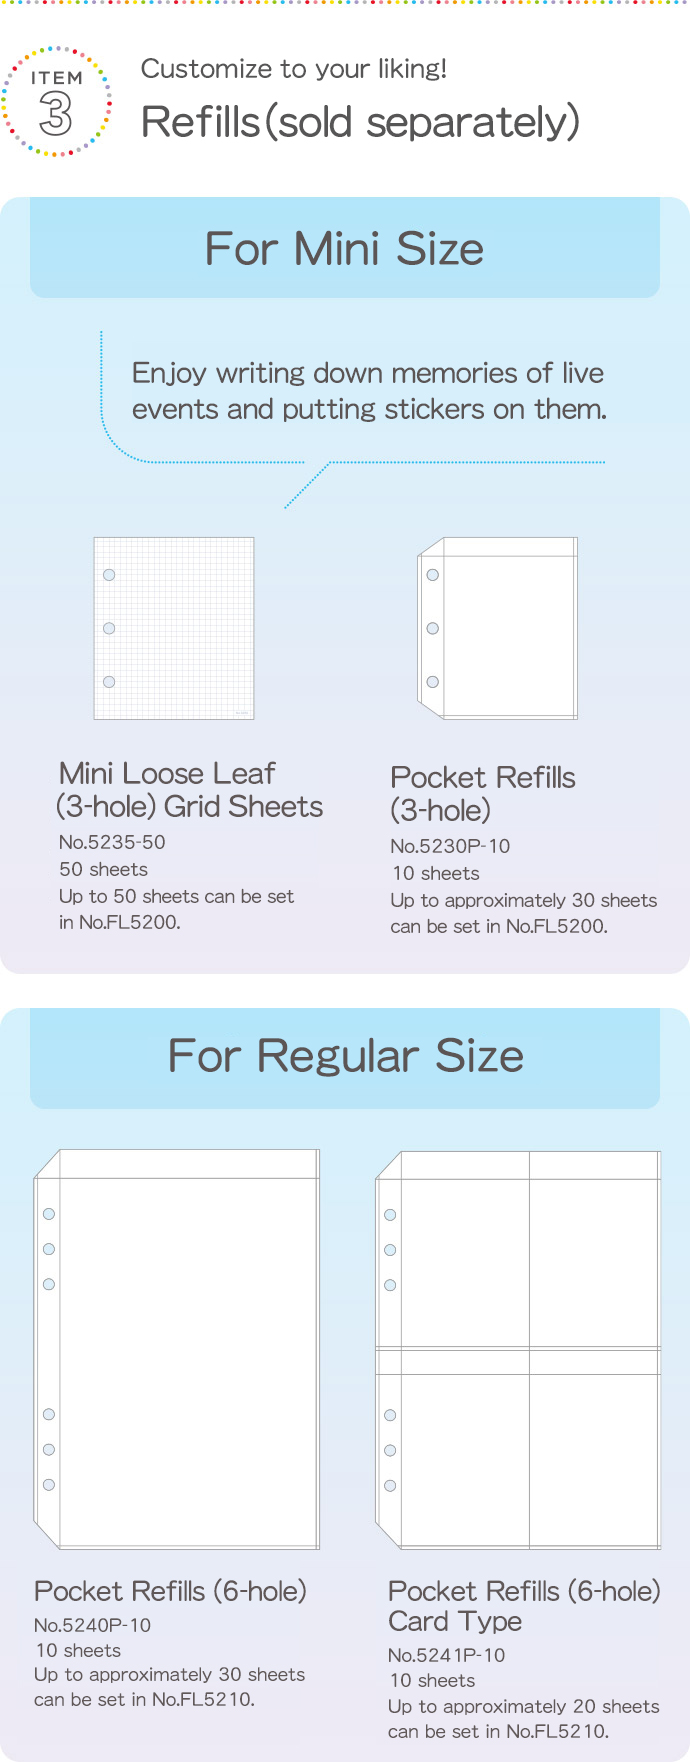 ITEM3 Customize to your liking! Refills (sold separately) For Mini Size Enjoy writing down memories of live events and putting stickers on them. Mini Loose Leaf (3-hole) Grid Sheets No.5235-50 50 sheets Up to 50 sheets can be set in No.FL5200.Pocket Refills (3-hole) No.5230P-10 10 sheets Up to approximately 30 sheets can be set in No.FL5200. For Regular Size Pocket Refills (6-hole) No.5240P-10 10 sheets Up to approximately 30 sheets can be set in No.FL5210. Pocket Refills (6-hole) Card Type No.5241P-10 10 sheets Up to approximately 20 sheets can be set in No.FL5210.